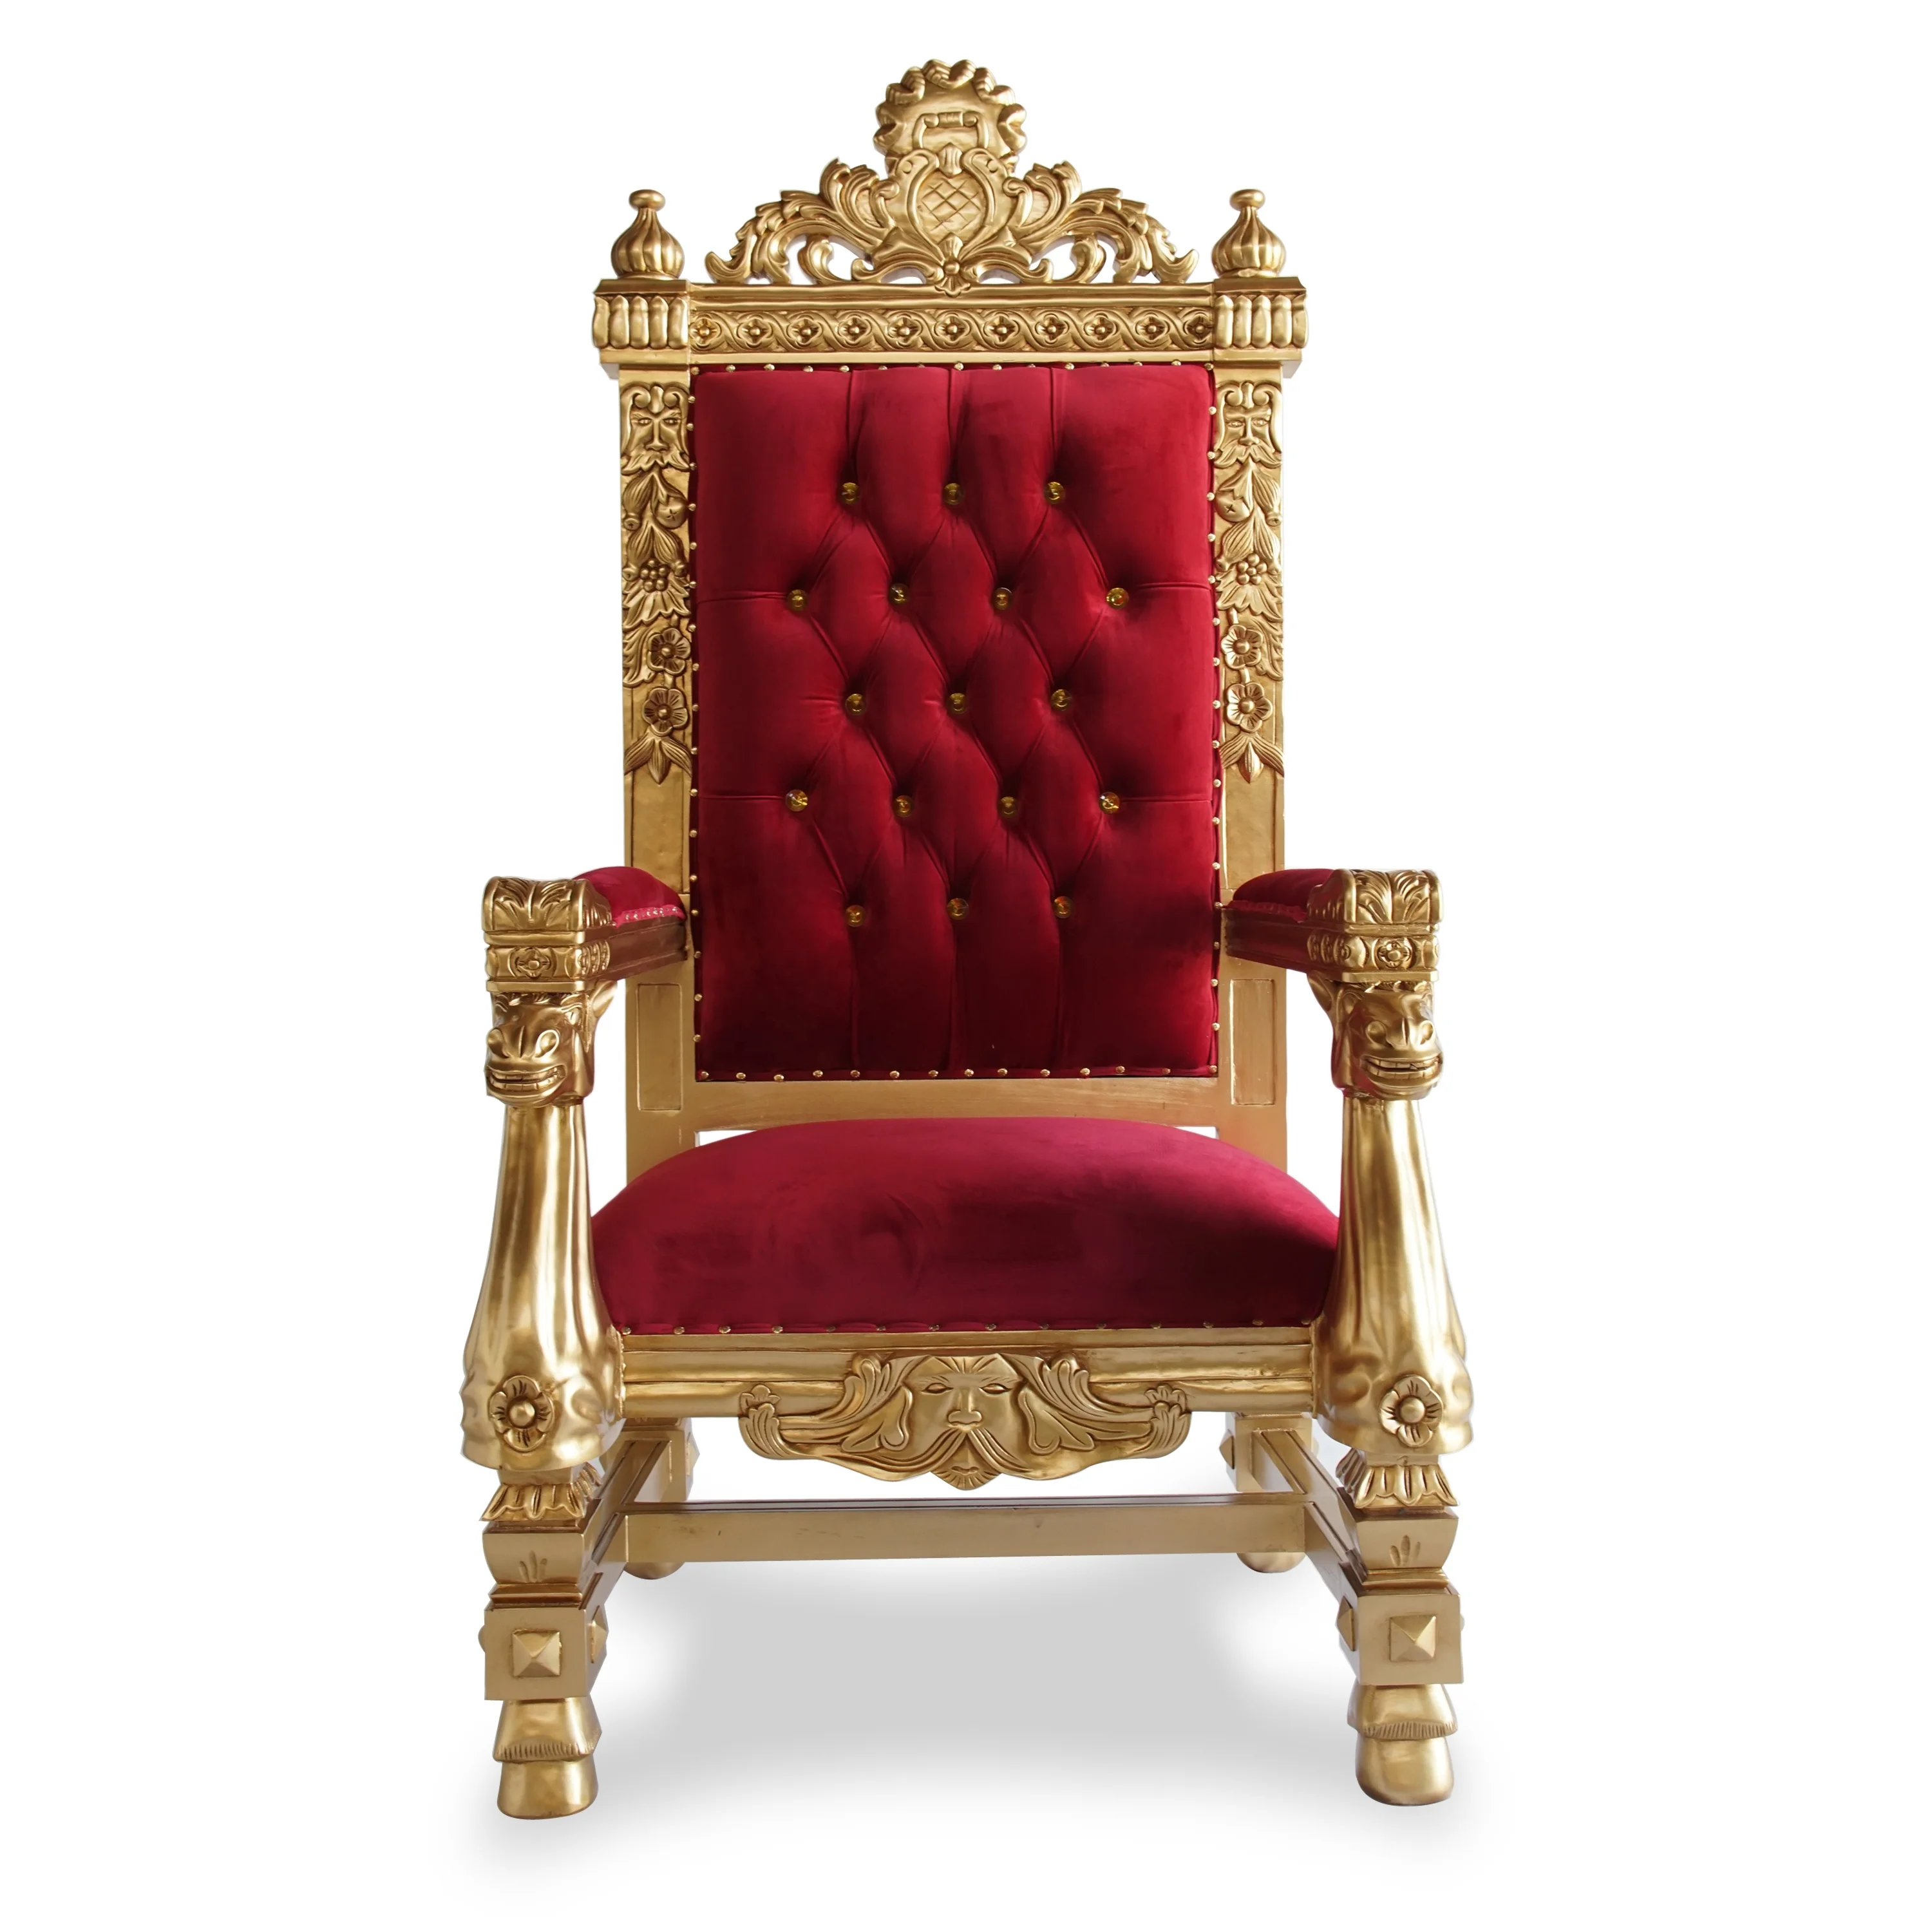 Royal Luxury Style King And Queen Wedding Rental Throne Chairs For Bride And Groom Buy Royal Luxury Style King And Queen Wedding Rental Throne Chair